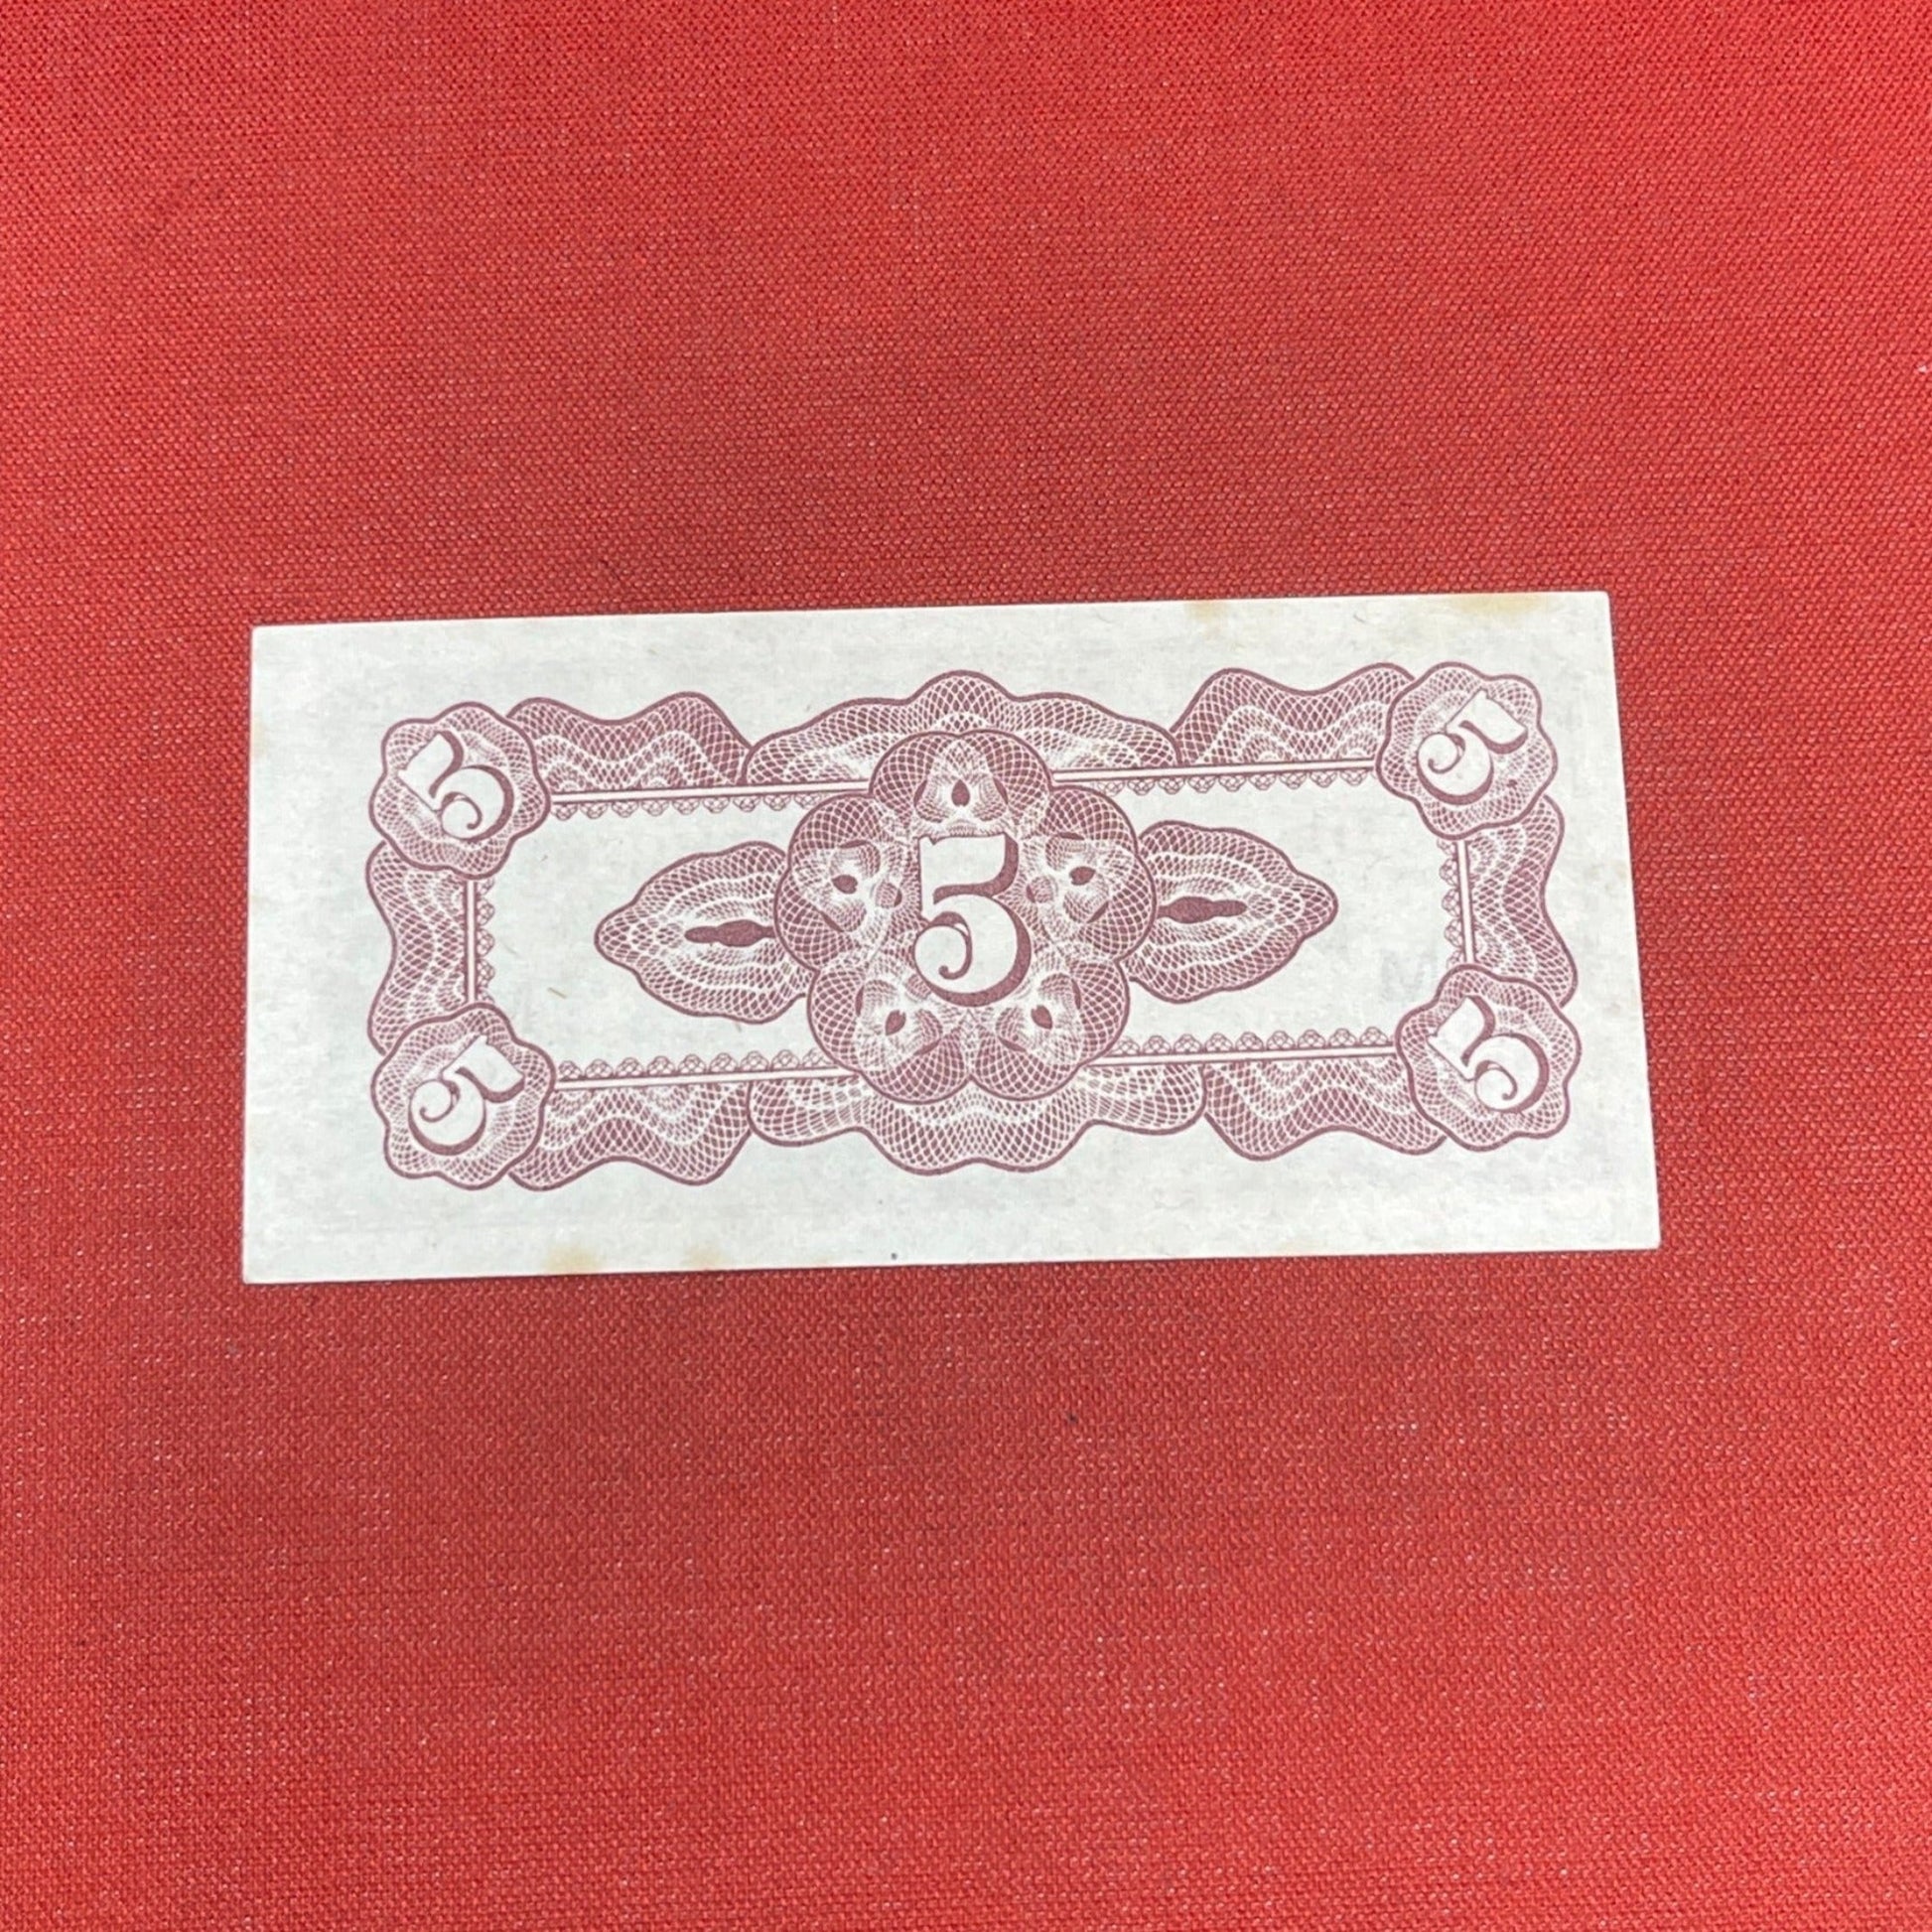 The Japanese Government 5 Cents Banknote